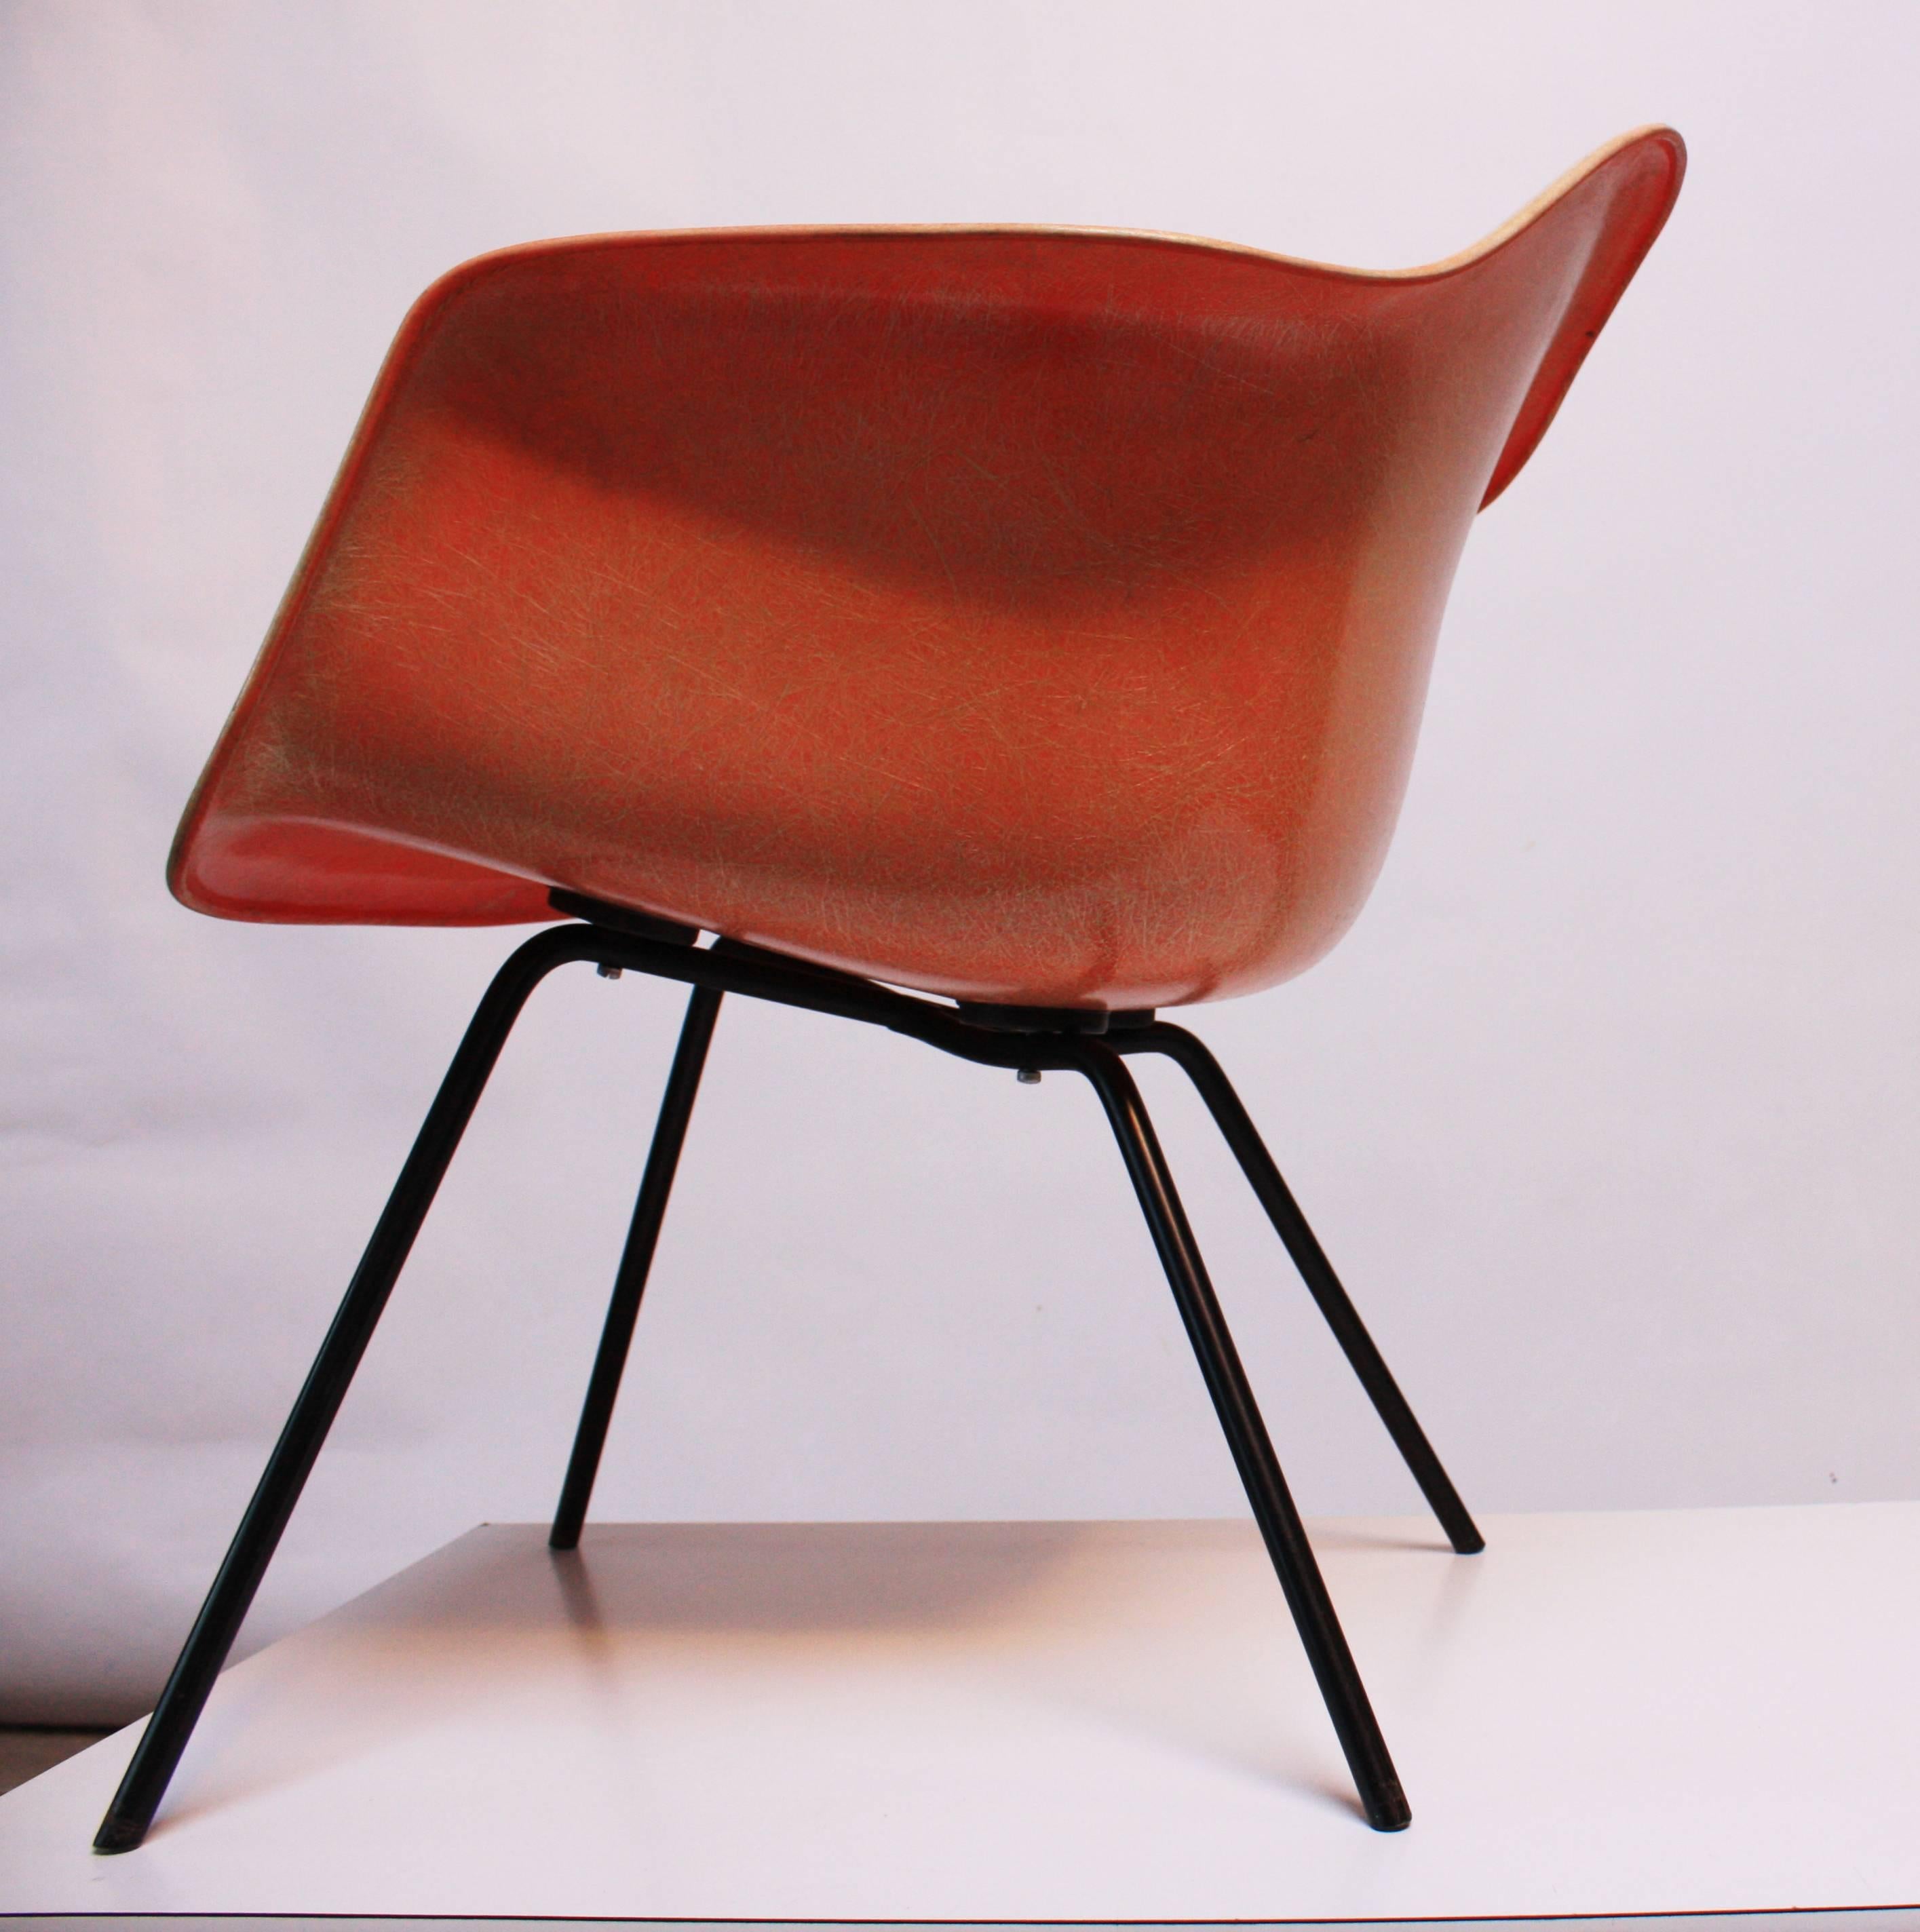 This early production Eames Rope Edge Chair is the lounge X-base version. There are no cracks or chips to the salmon fiberglass armshell, and the original shock mounts and screws are sound and intact. The underside of the seat retains its Zenith